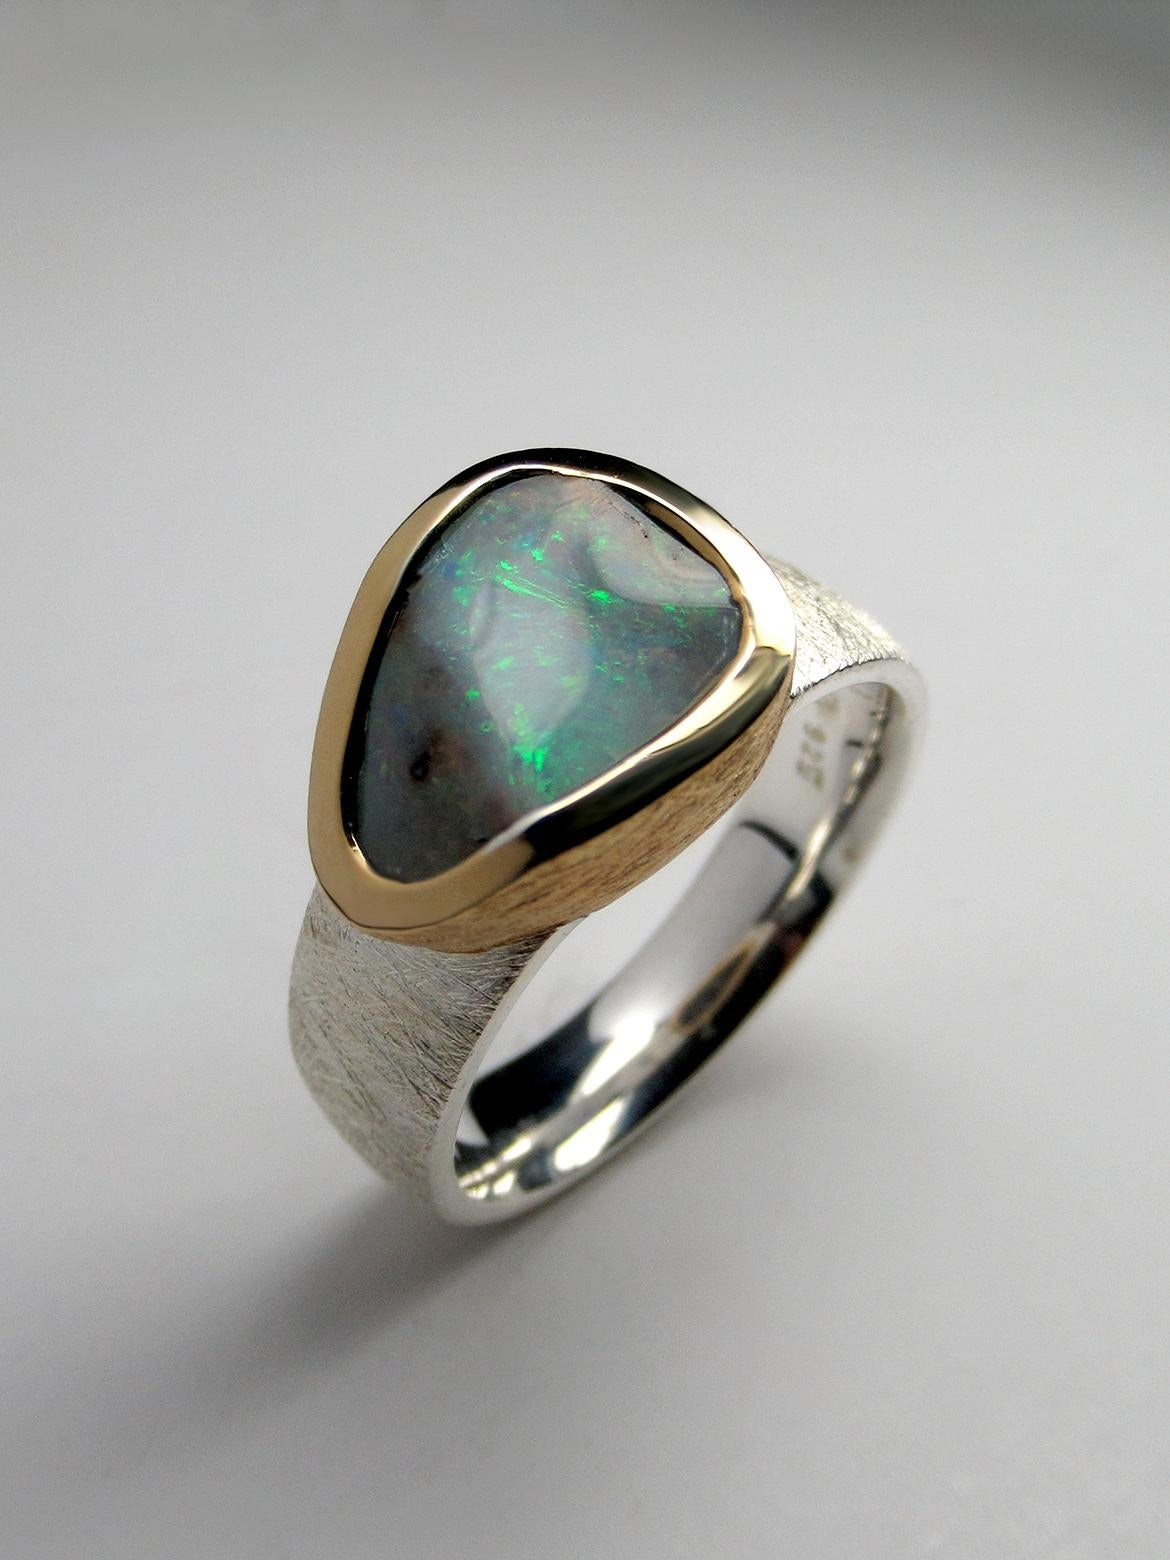 Cabochon Boulder Opal Silver Ring Australian Opal Wedding Anniversary Statement Ring For Sale